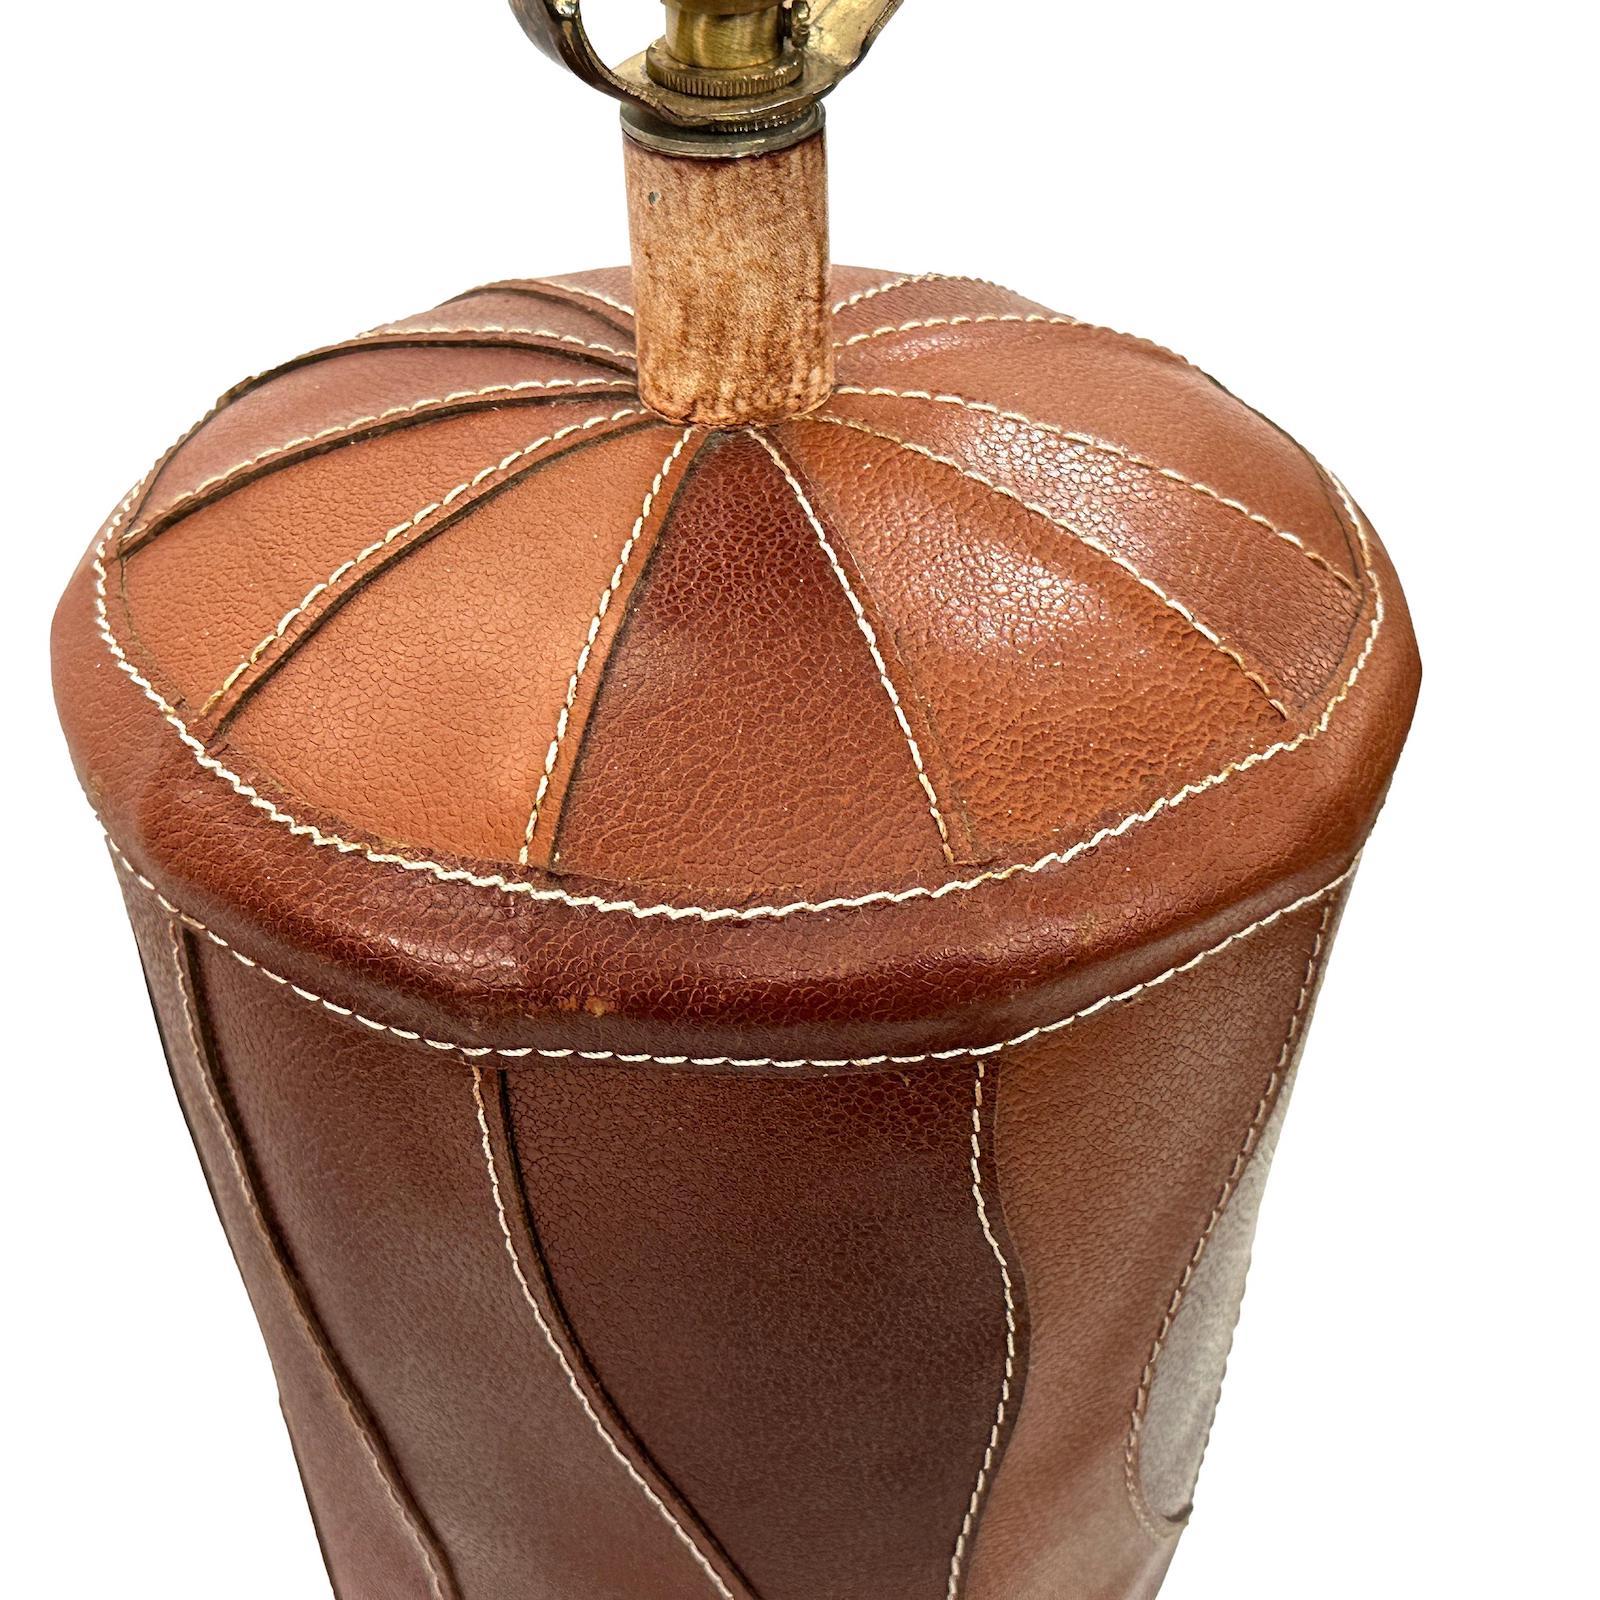 A single circa 1970's French leather covered table lamp.

Measurements:
Height of body: 20